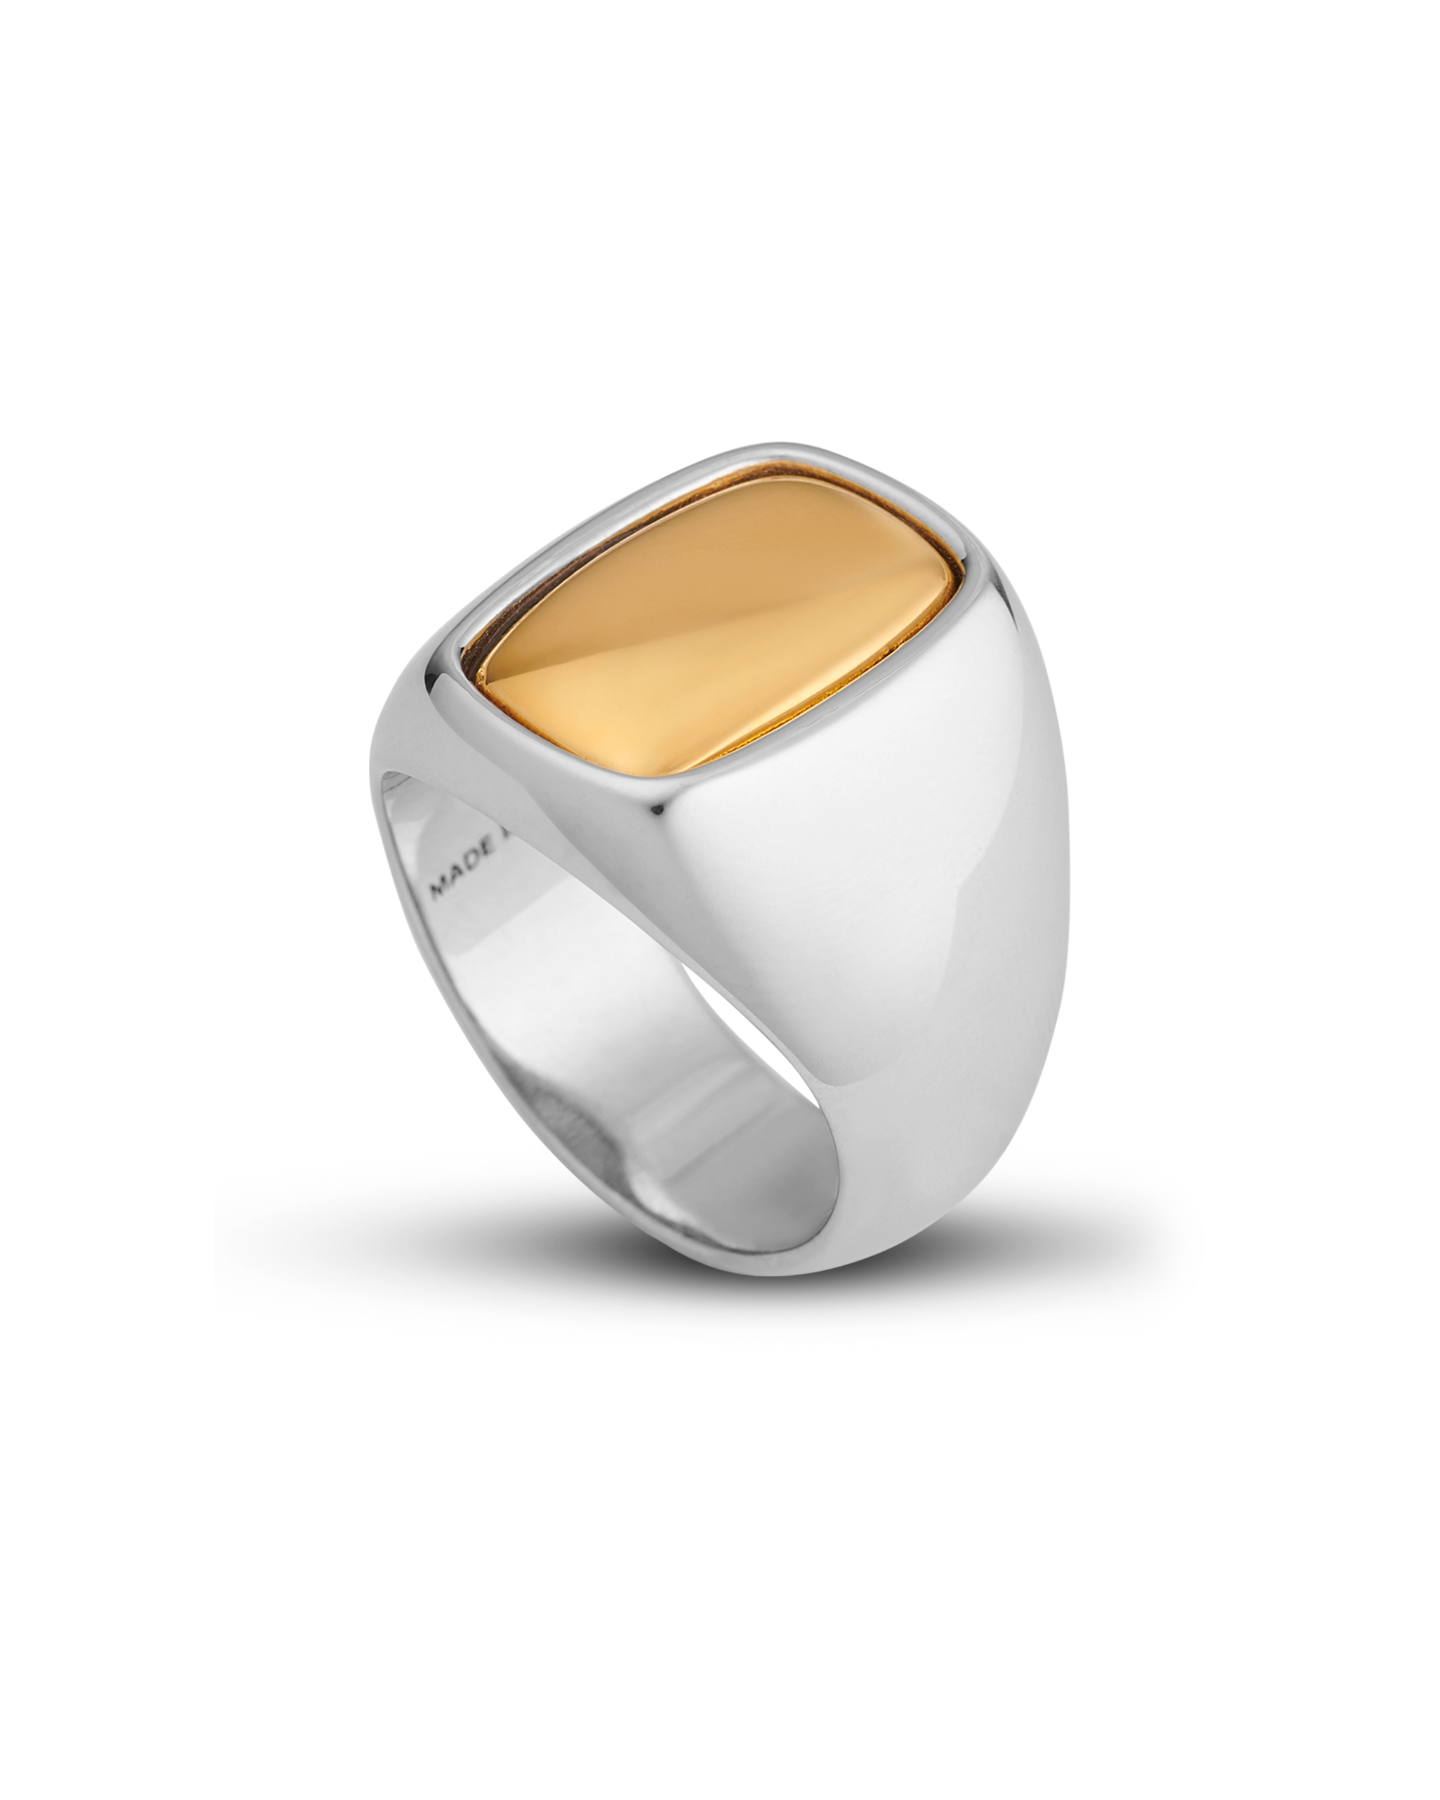 SMALL TOY SIGNET RING